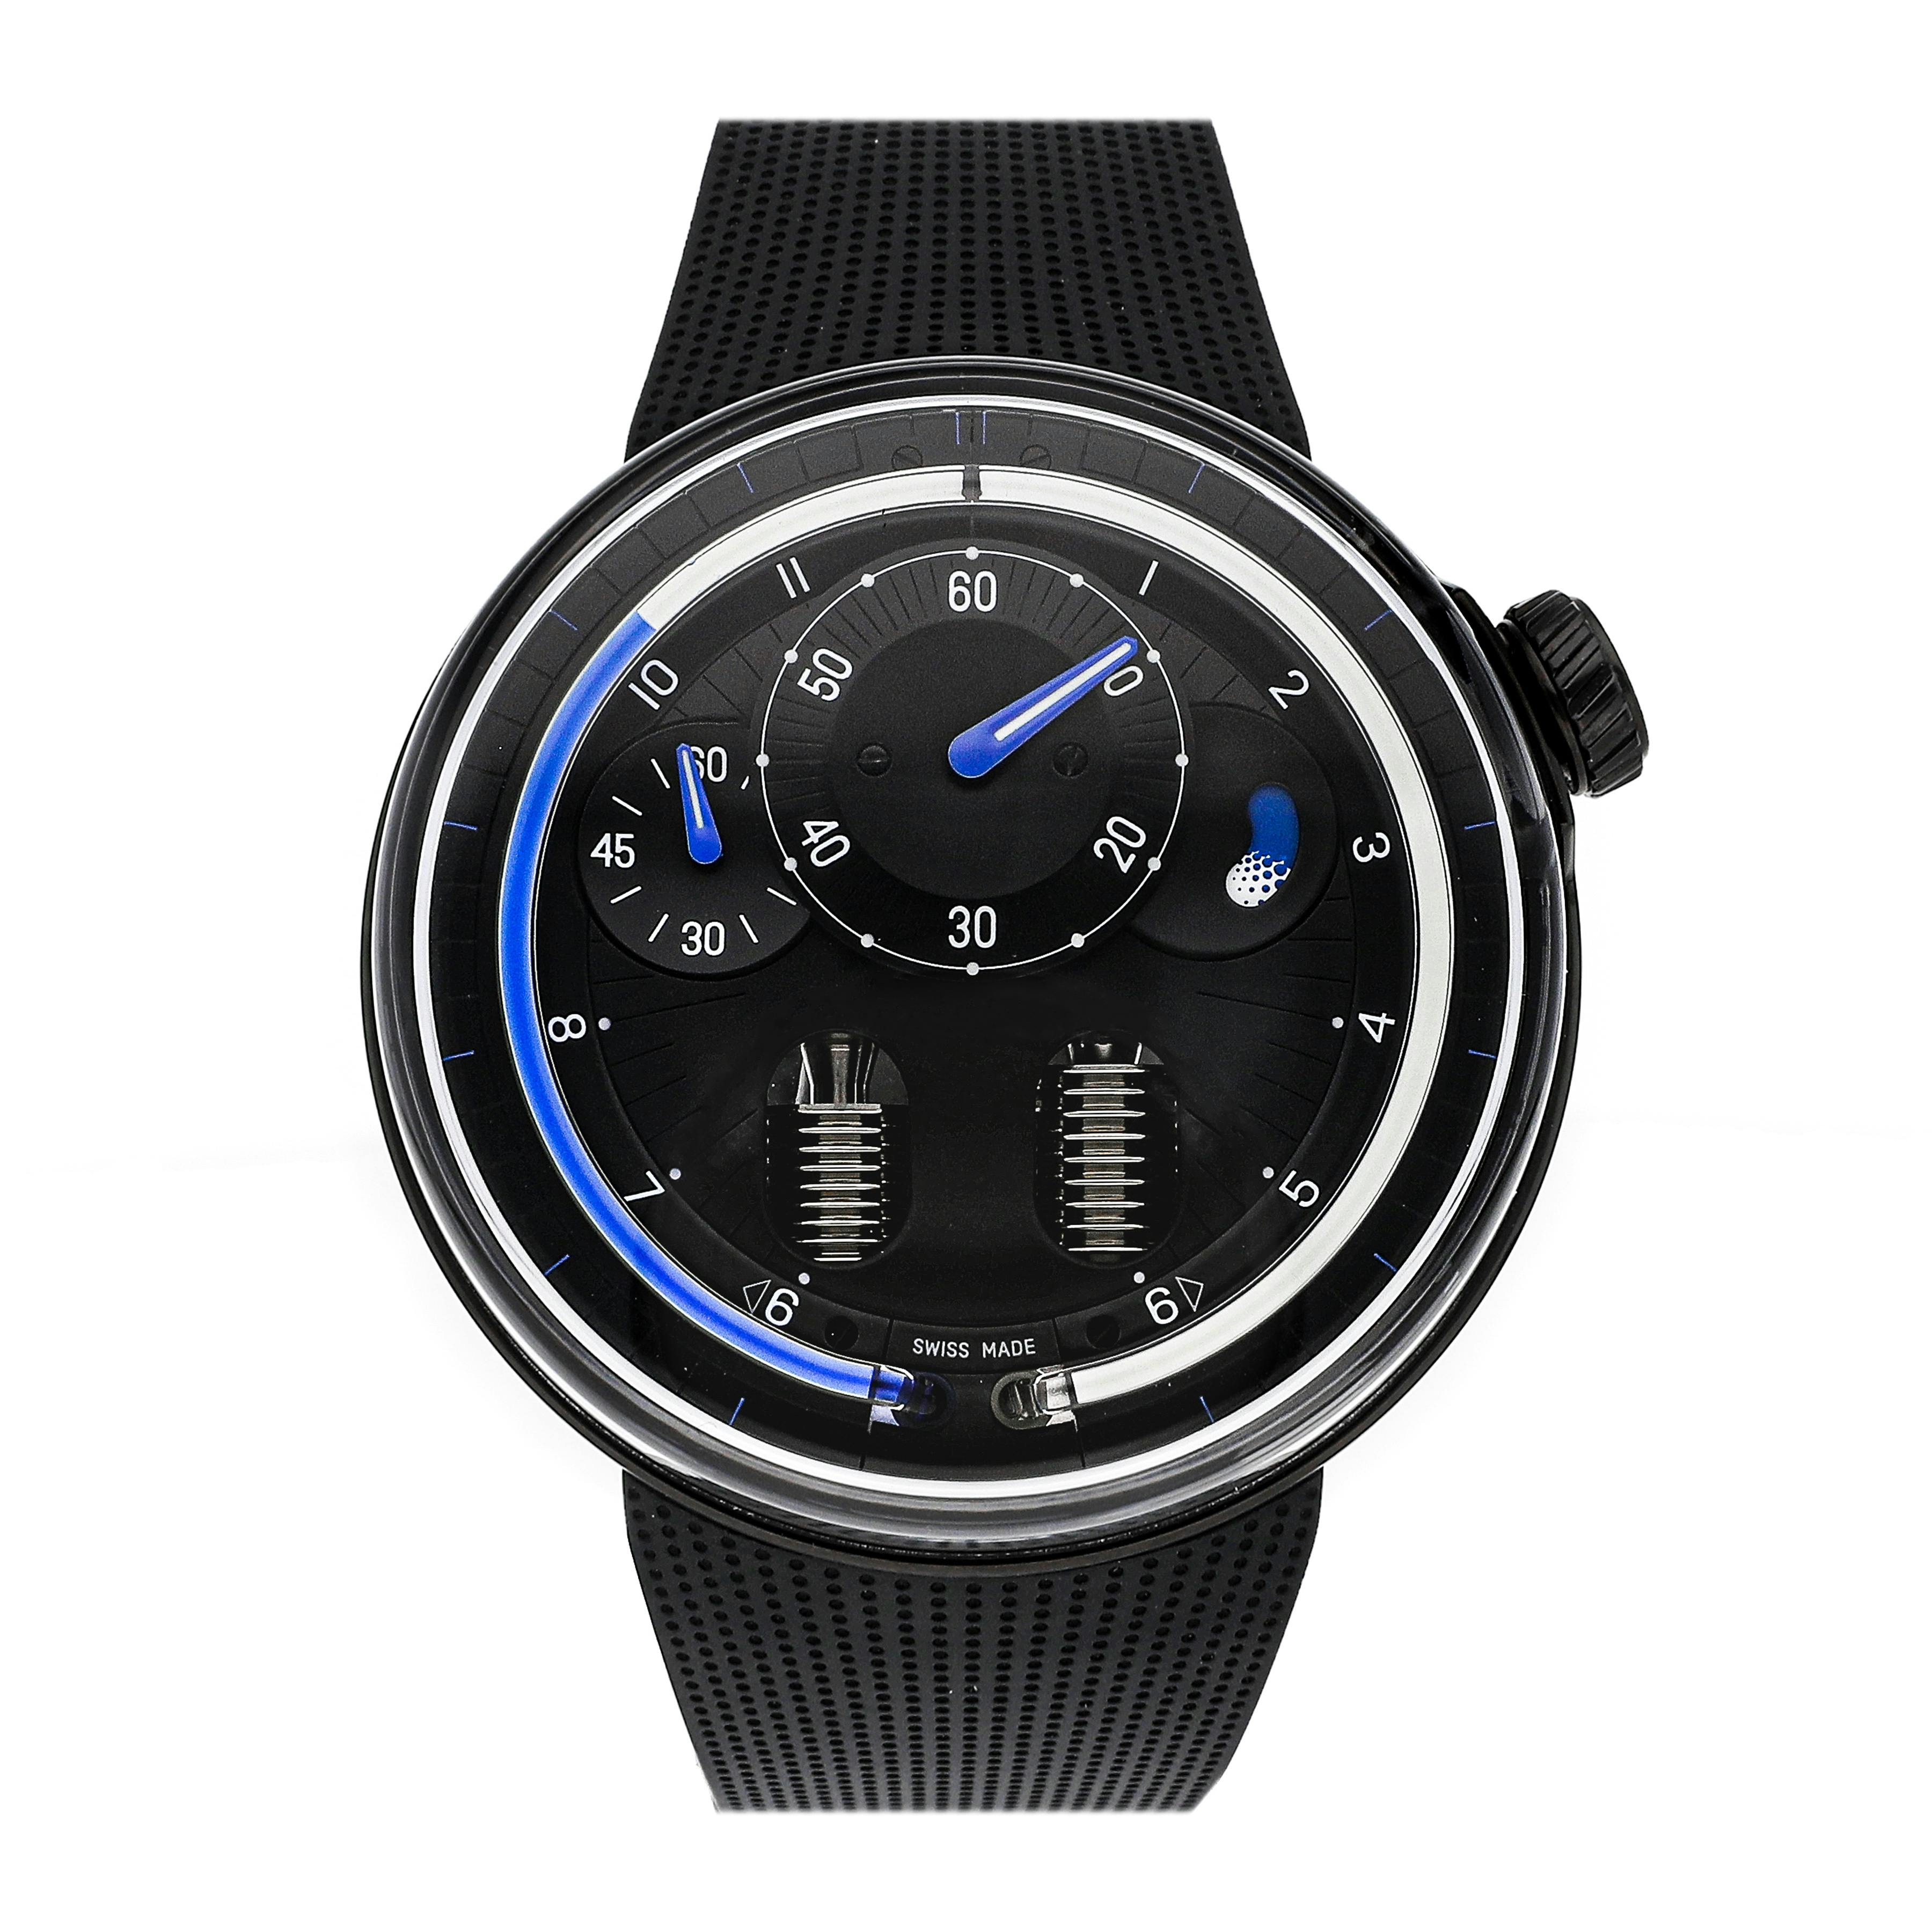 HYT Watches: product news and detailed watch reviews